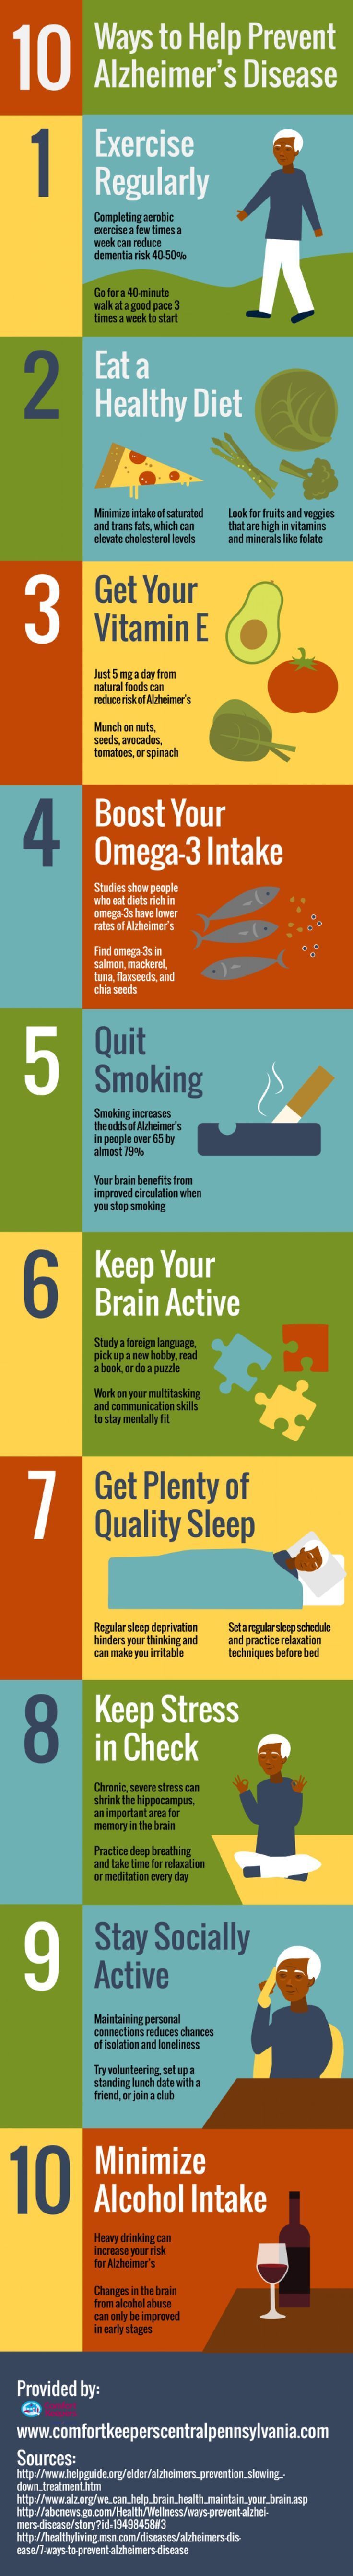 10 Ways to Help Prevent Alzheimer’s Disease -shared by BrittSE on Mar 29, 201